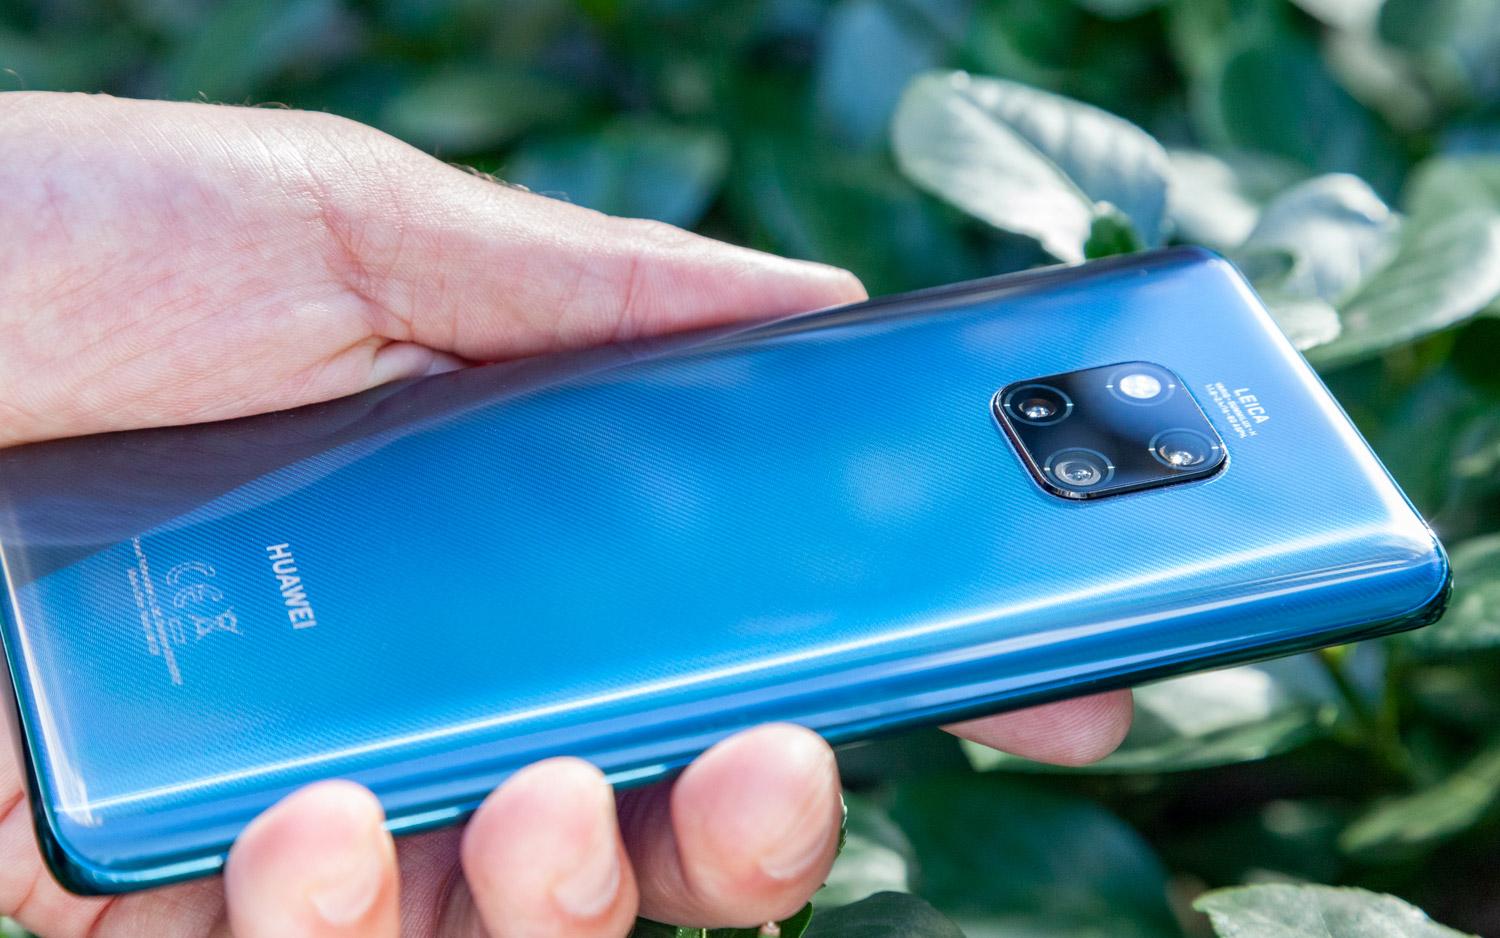 Own a Huawei Phone? Here’s How the Ban Will Affect You